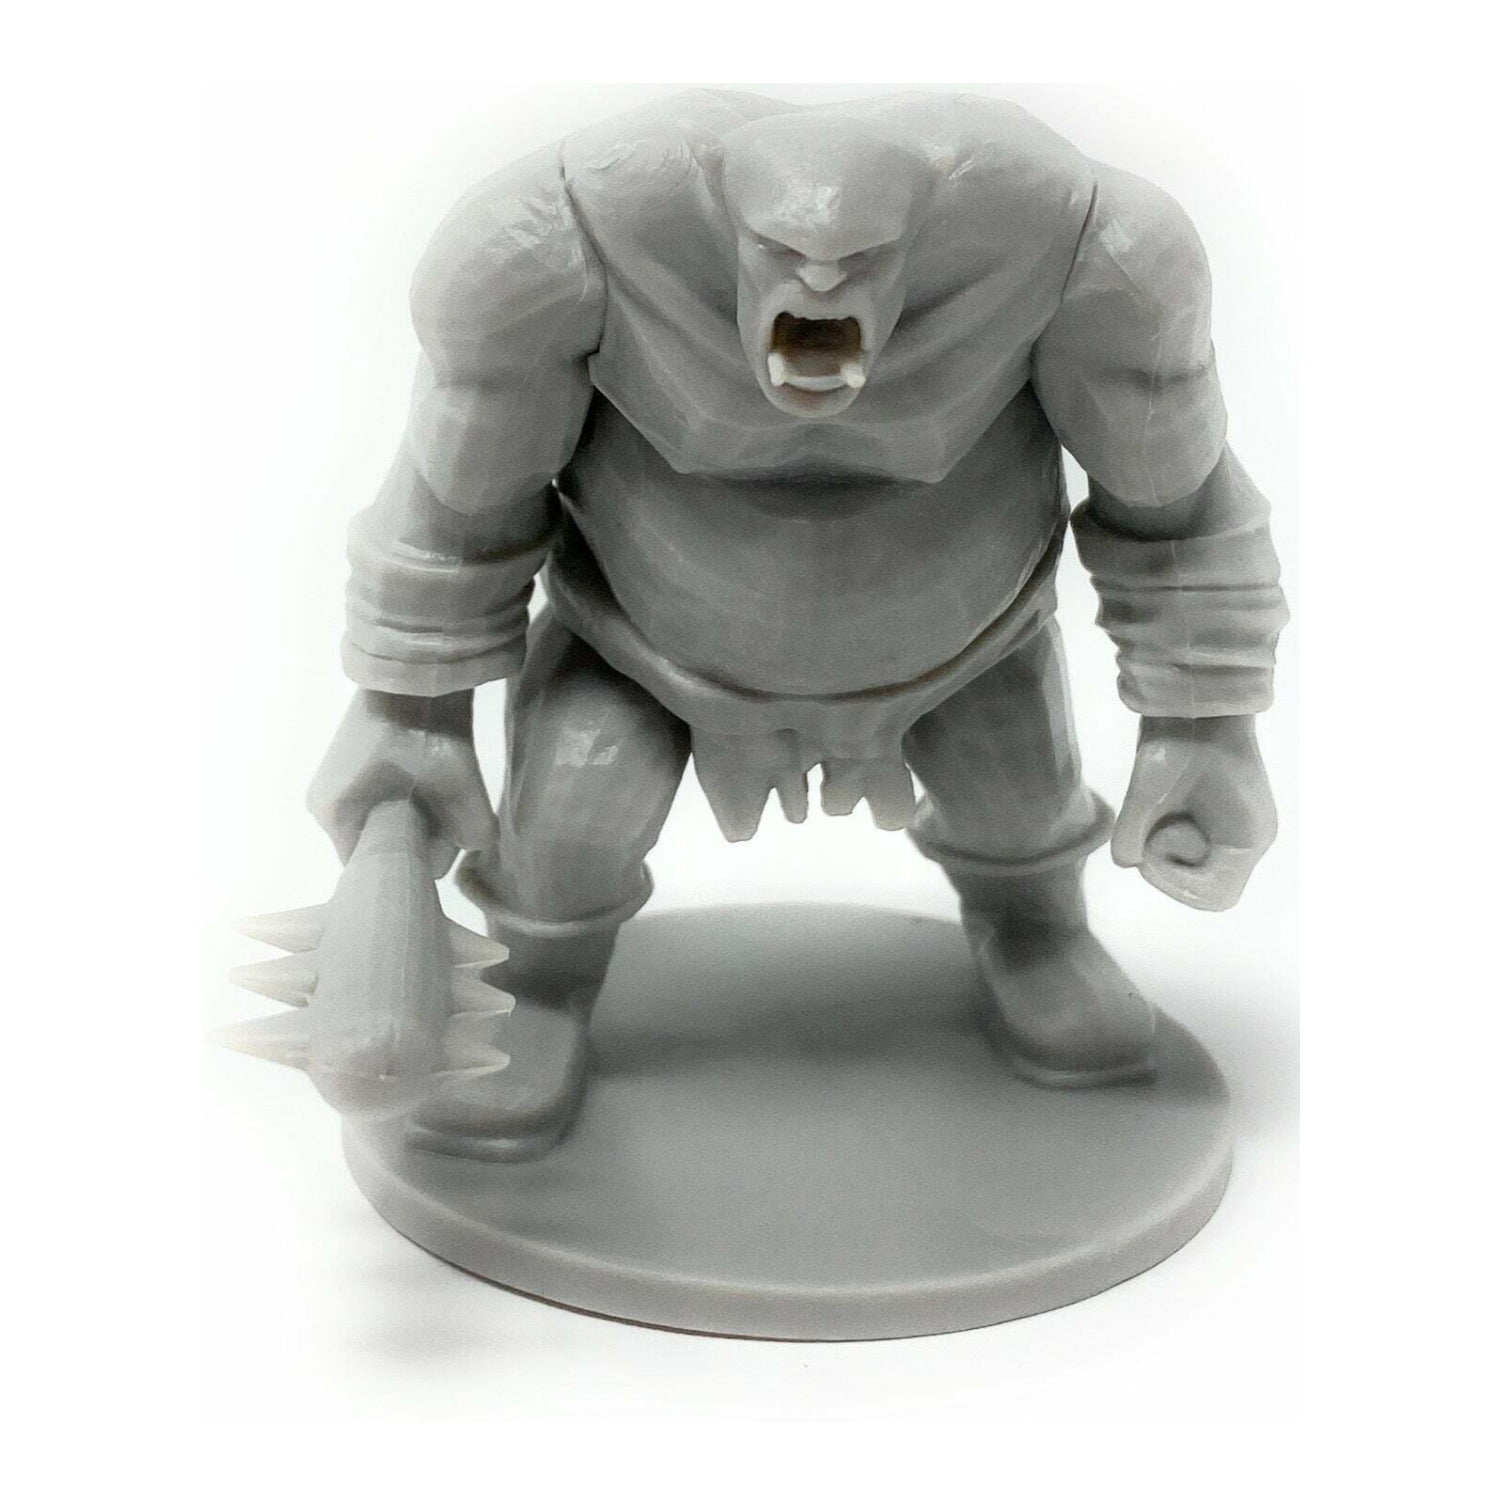 38 Miniatures Fantasy Tabletop RPG Figures for Dungeons and Dragons Bulk Unpainted 10 Unique Designs Great for D&D/DND Pathfinder Roleplaying Games 28MM Scaled Miniatures 